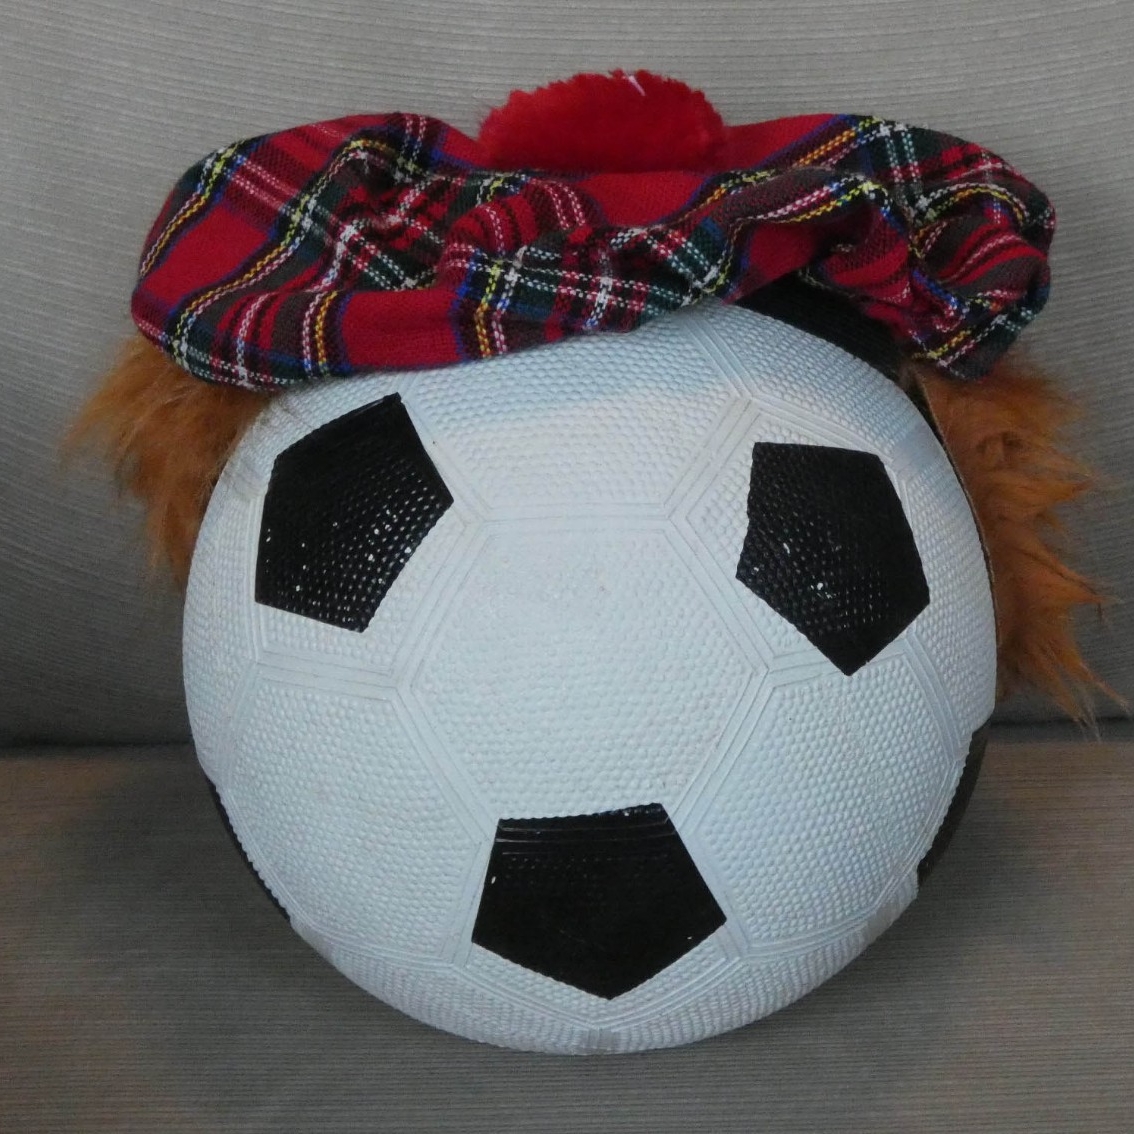 soccer strip of the Celtic Football Club, soccer ball with red-haired wig, and Scottish hat